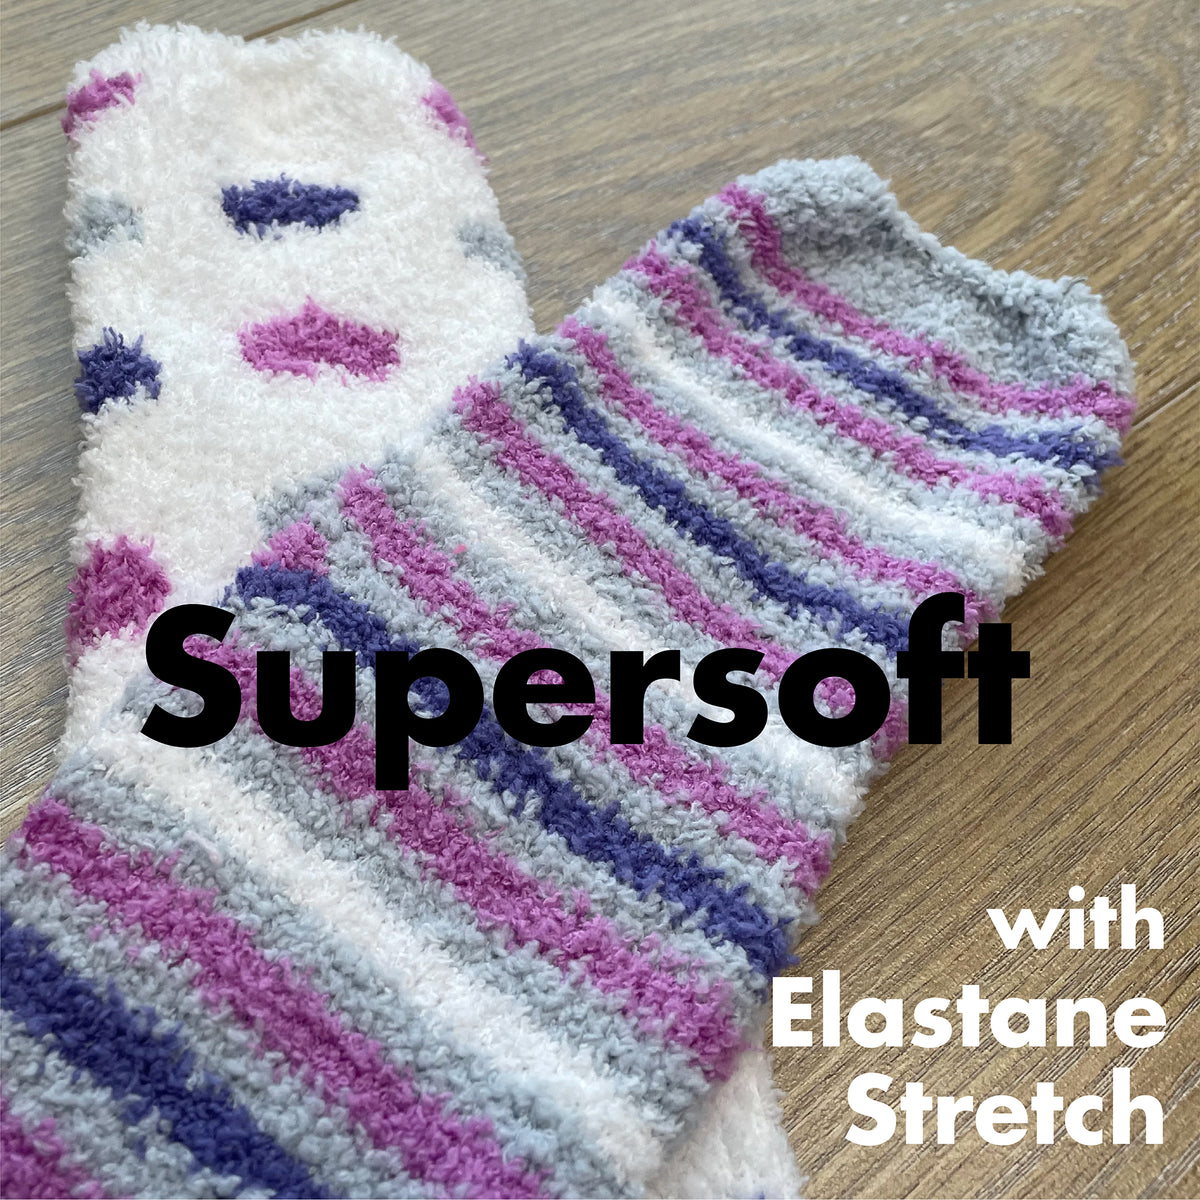 Ladies Hearts/Stripes Supersoft Fluffy Cosy Socks 2 Pack